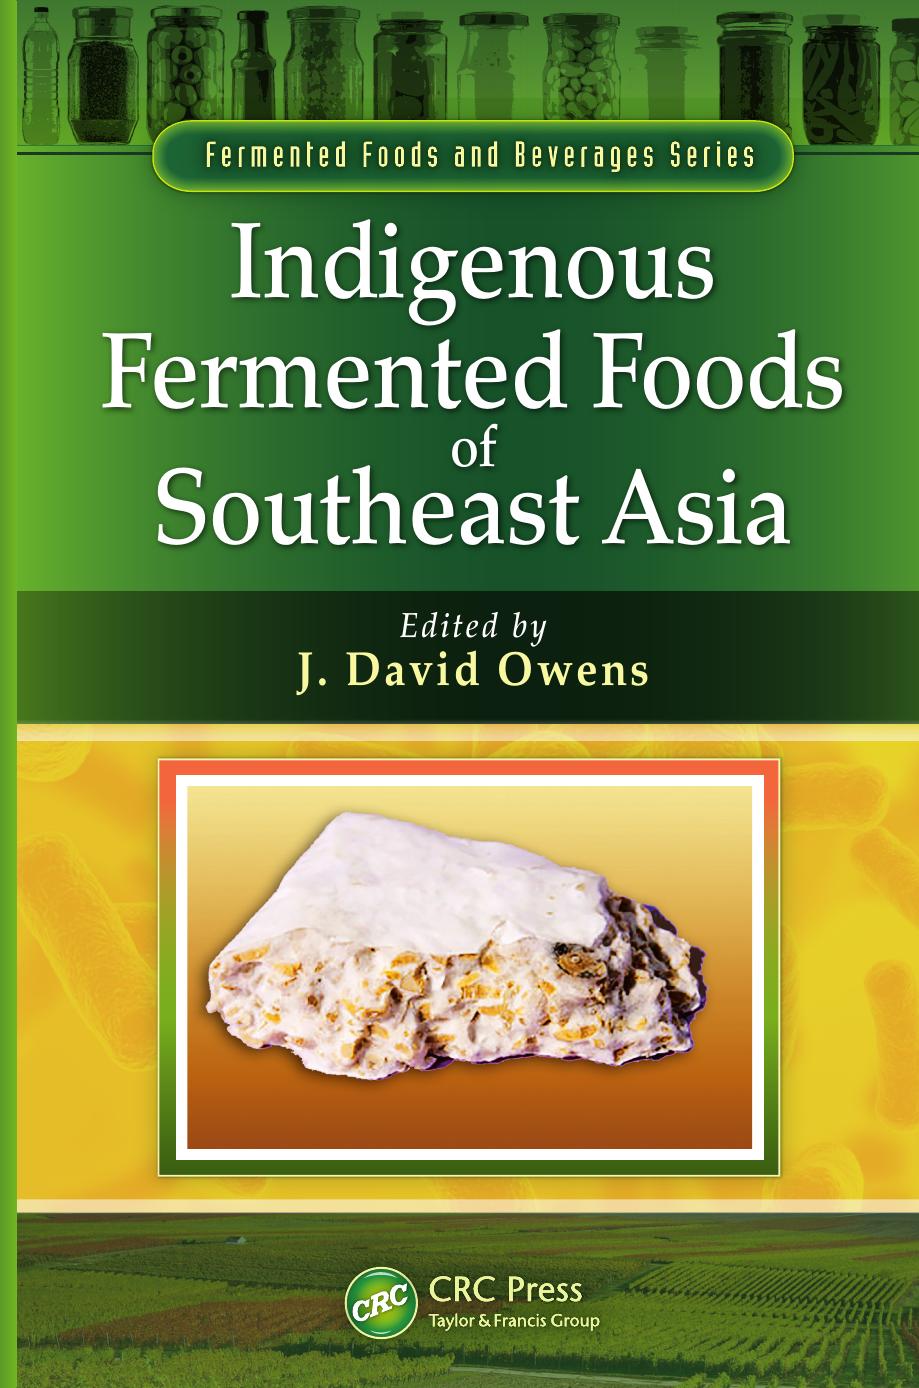 Indigenous Fermented Foods of Southeast Asia